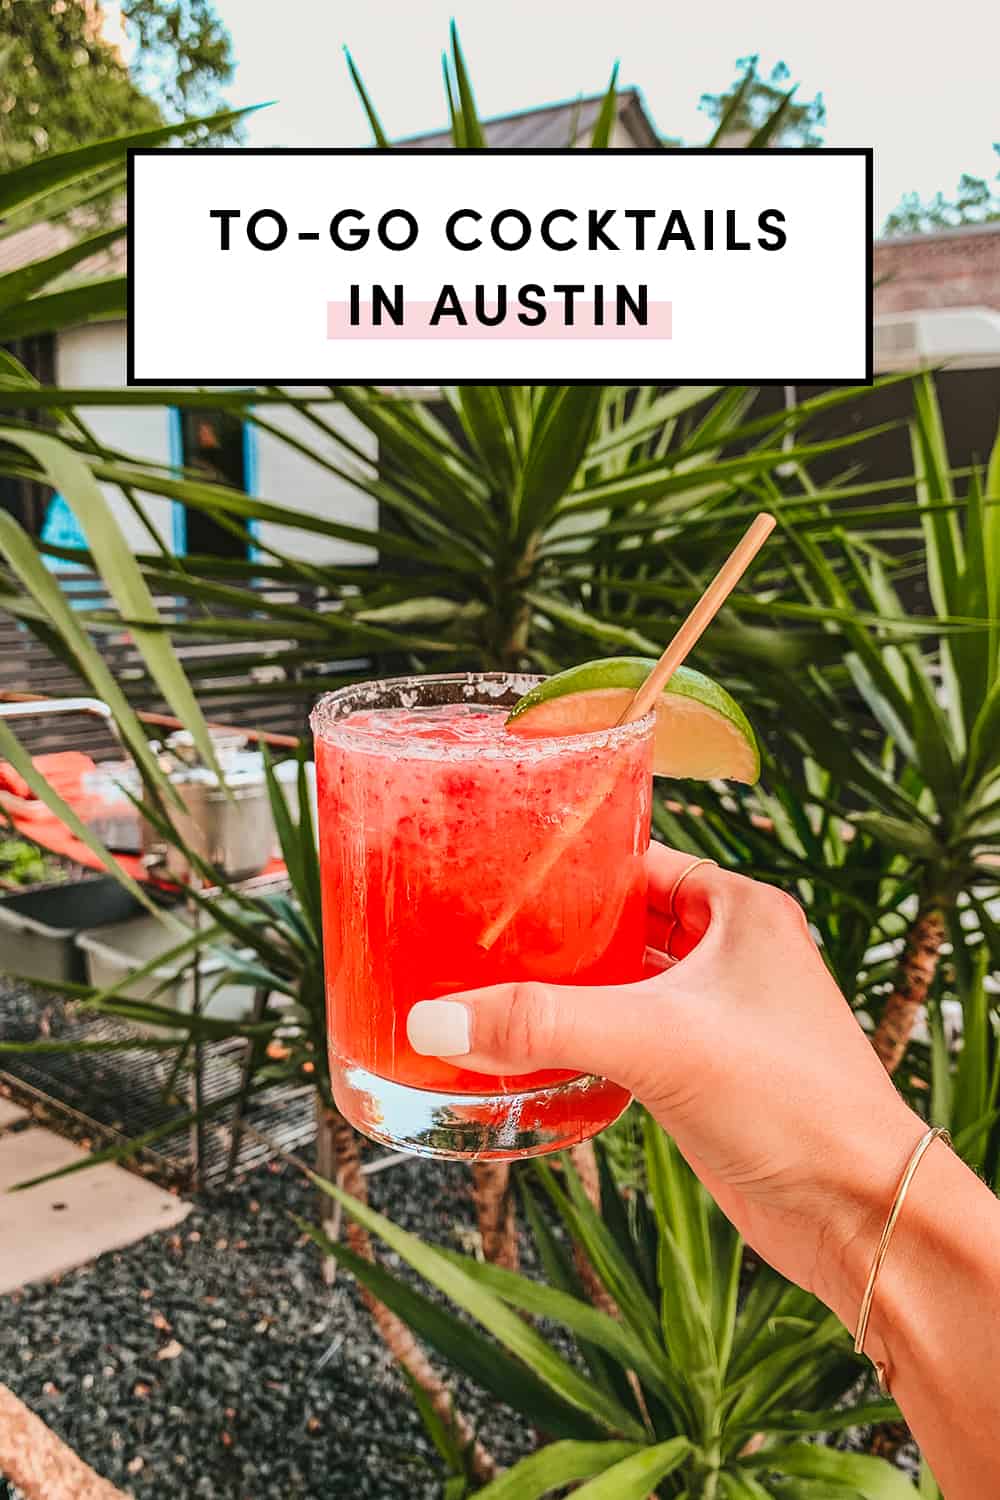 To Go Cocktails in Austin